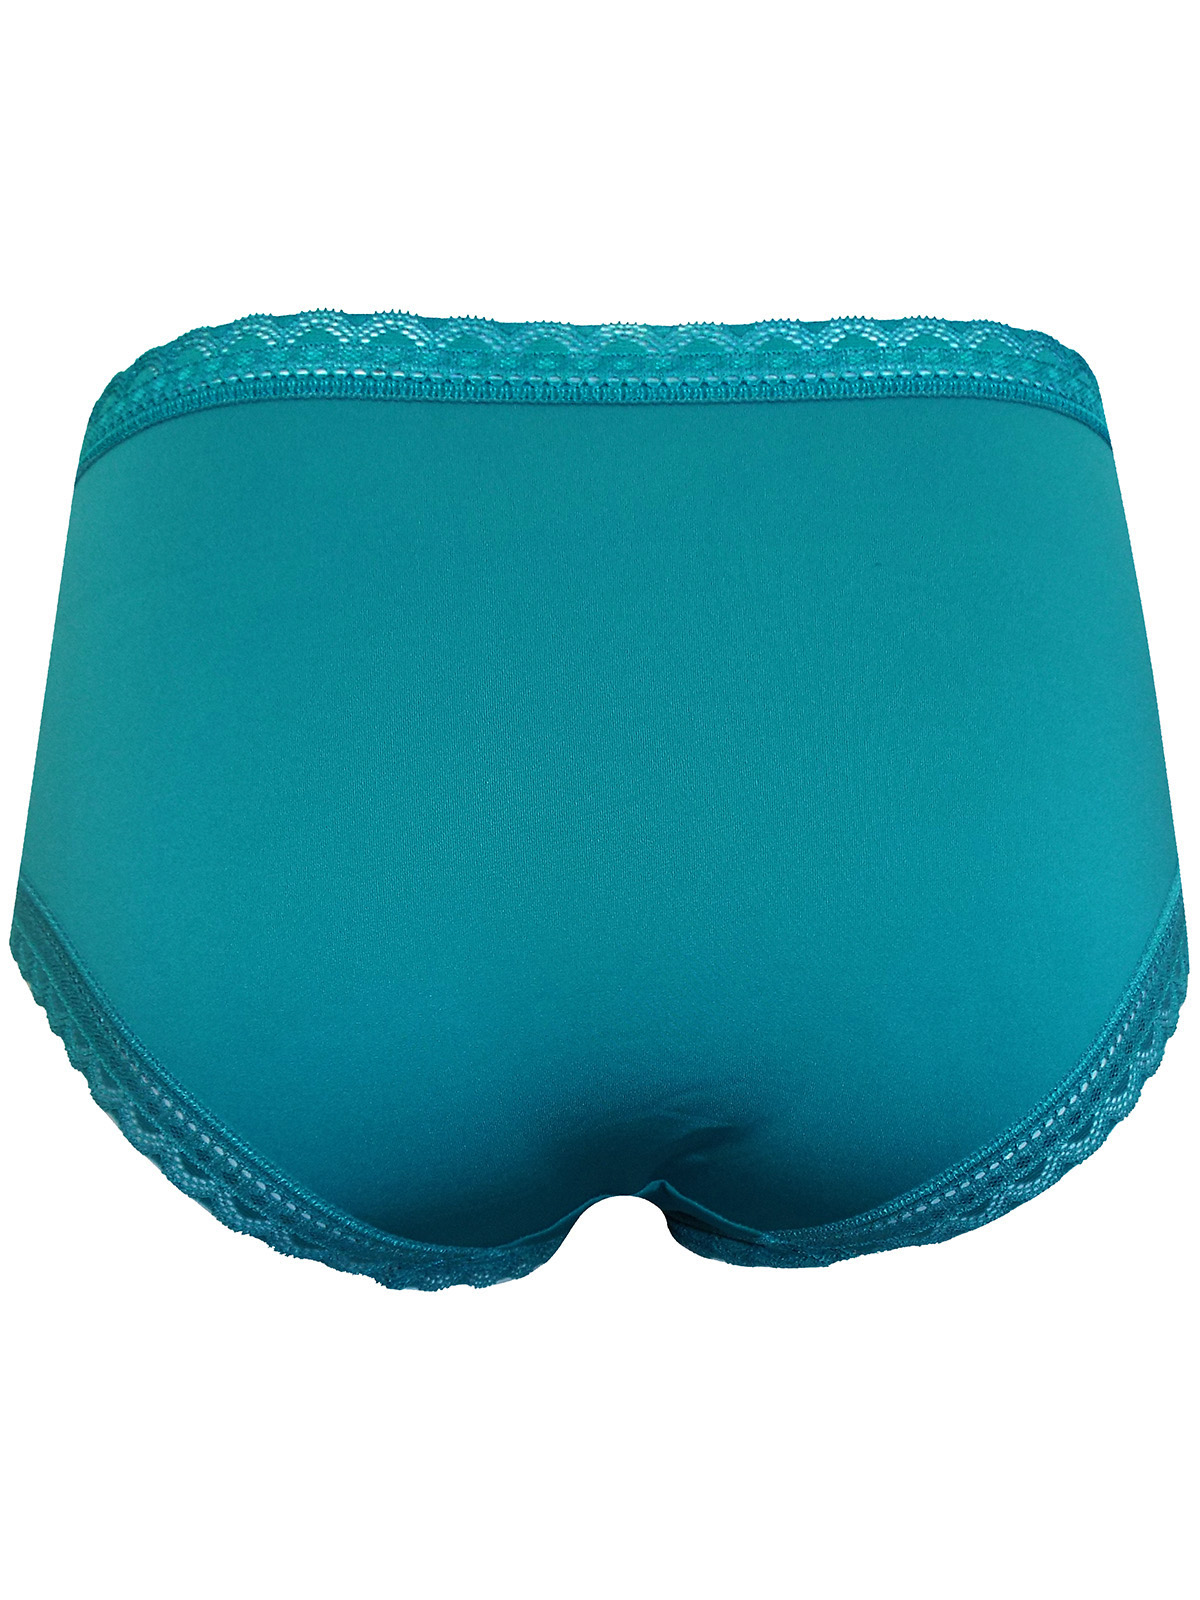 Marks and Spencer - - M&5 FORREST-GREEN No VPL Lace Trim Midi Knickers ...